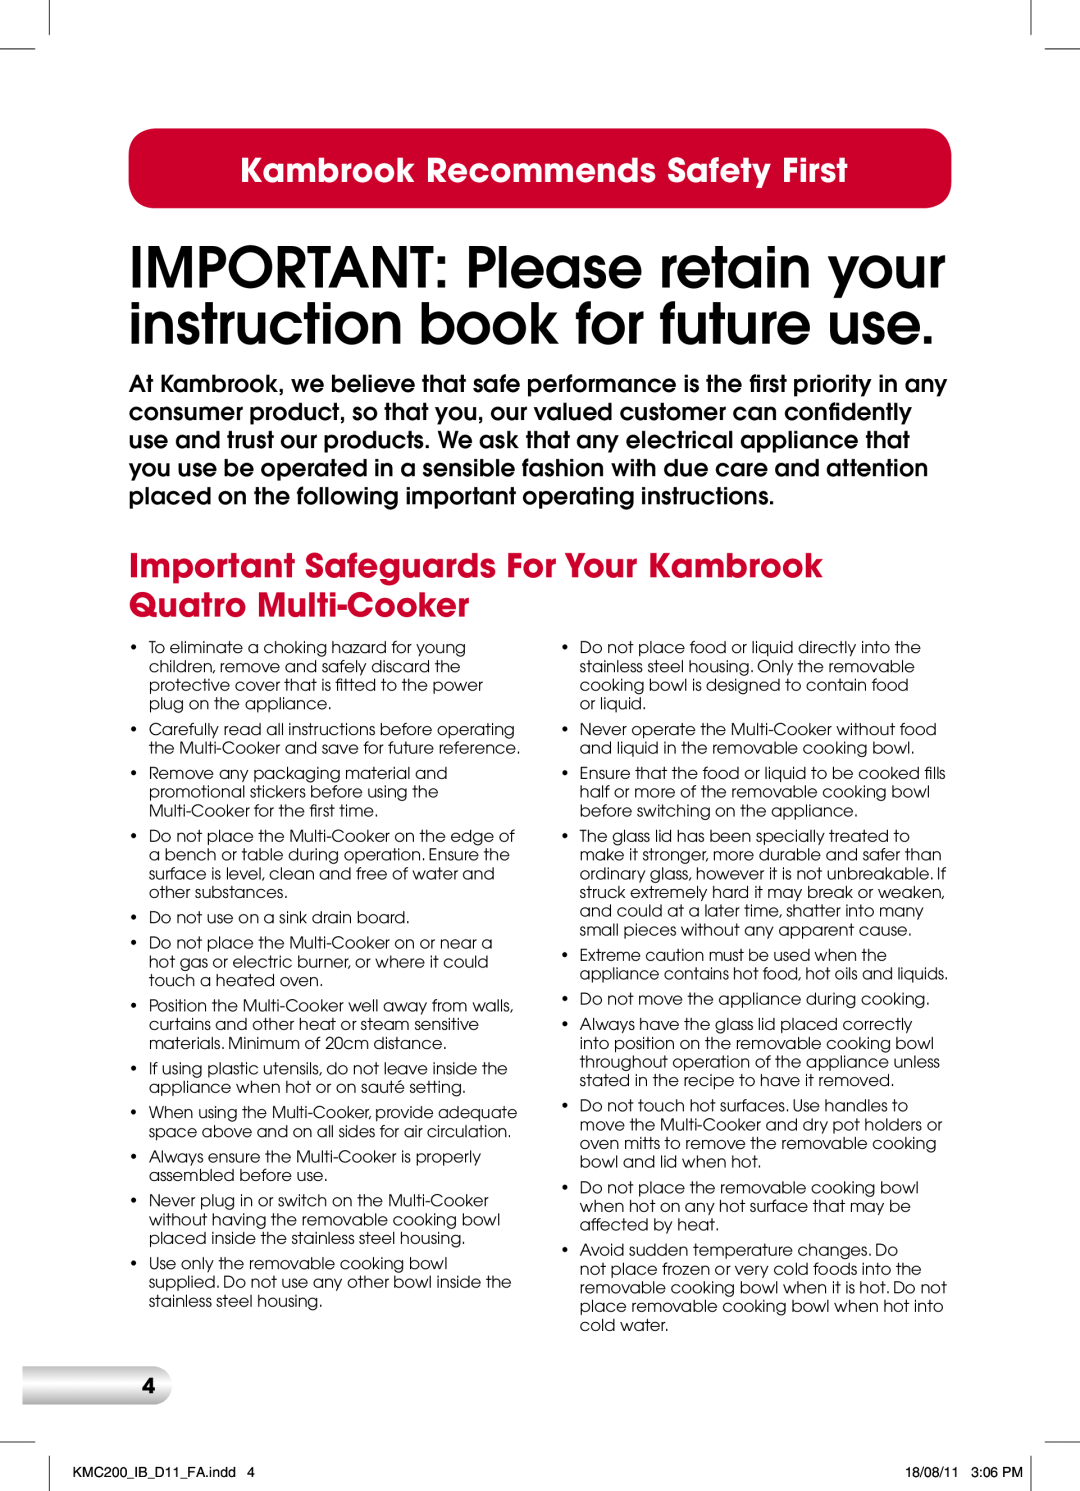 Kambrook KMC200 manual Kambrook Recommends Safety First 